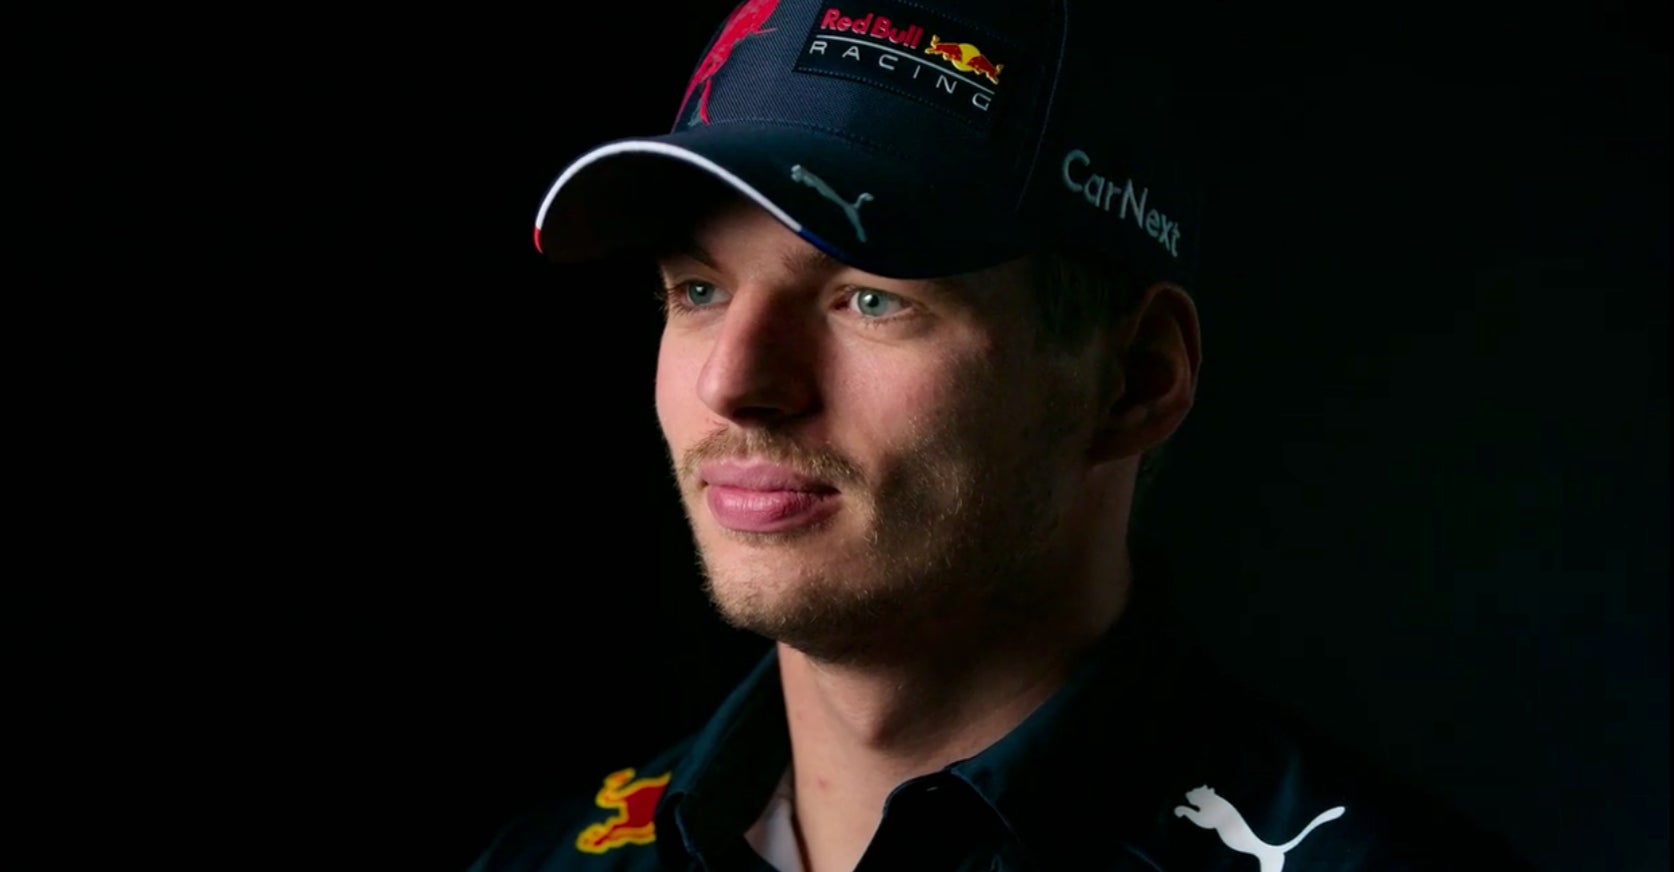 Max Verstappen is back in the Netflix chair but only appears fleetingly